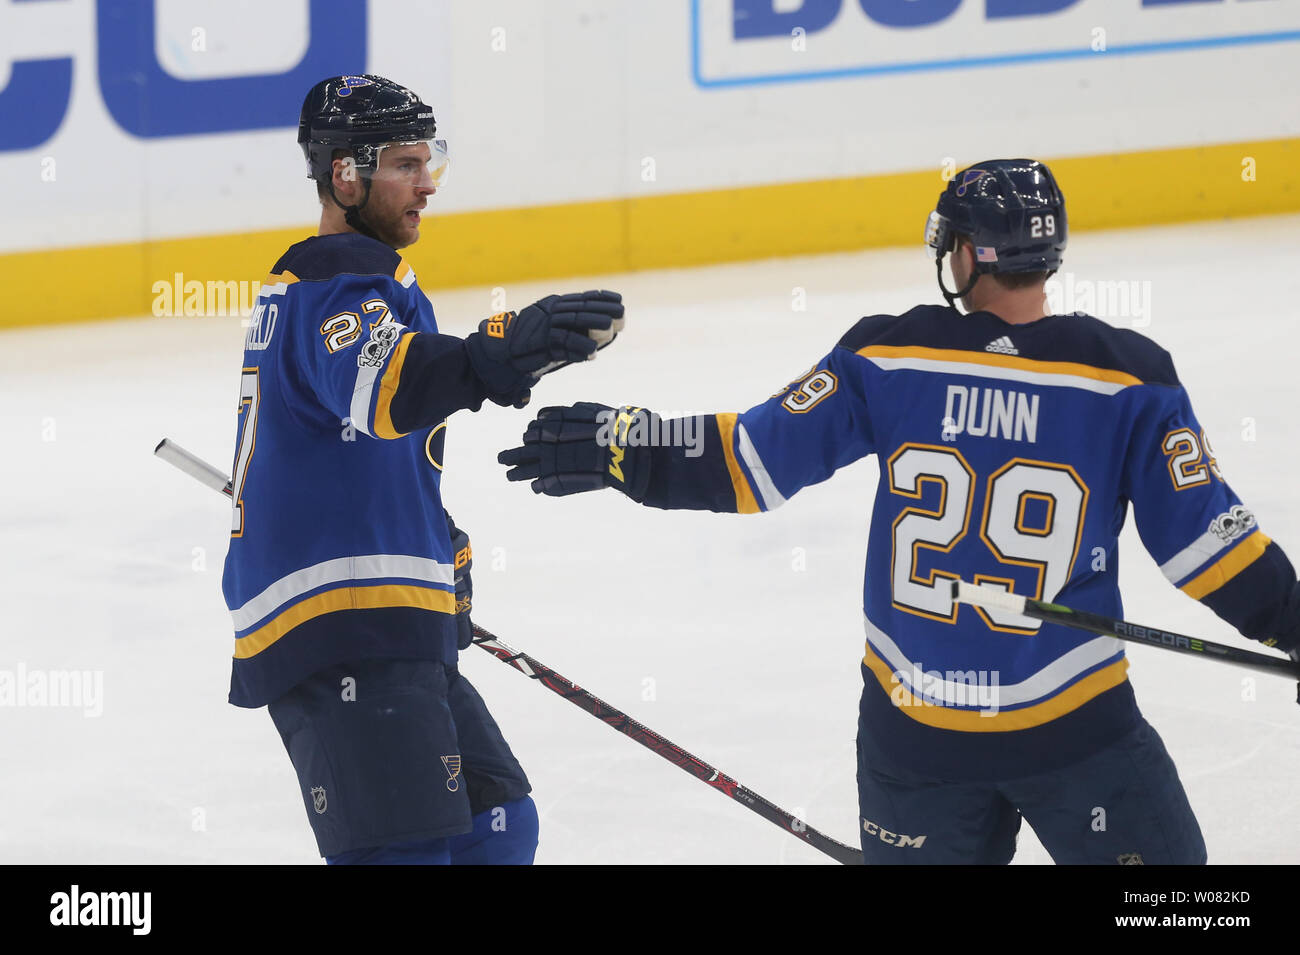 St. Louis Blues Alex Pietrangelo is congratulated by Vince Dunn after scoring the tying goal against the Arizona Coyotes in the third period at the Scottrade Center in St. Louis on November 9, 2017. St. Louis defeated Arizona in a shootout 3-2.  Photo by Bill Greenblatt/UPI Stock Photo